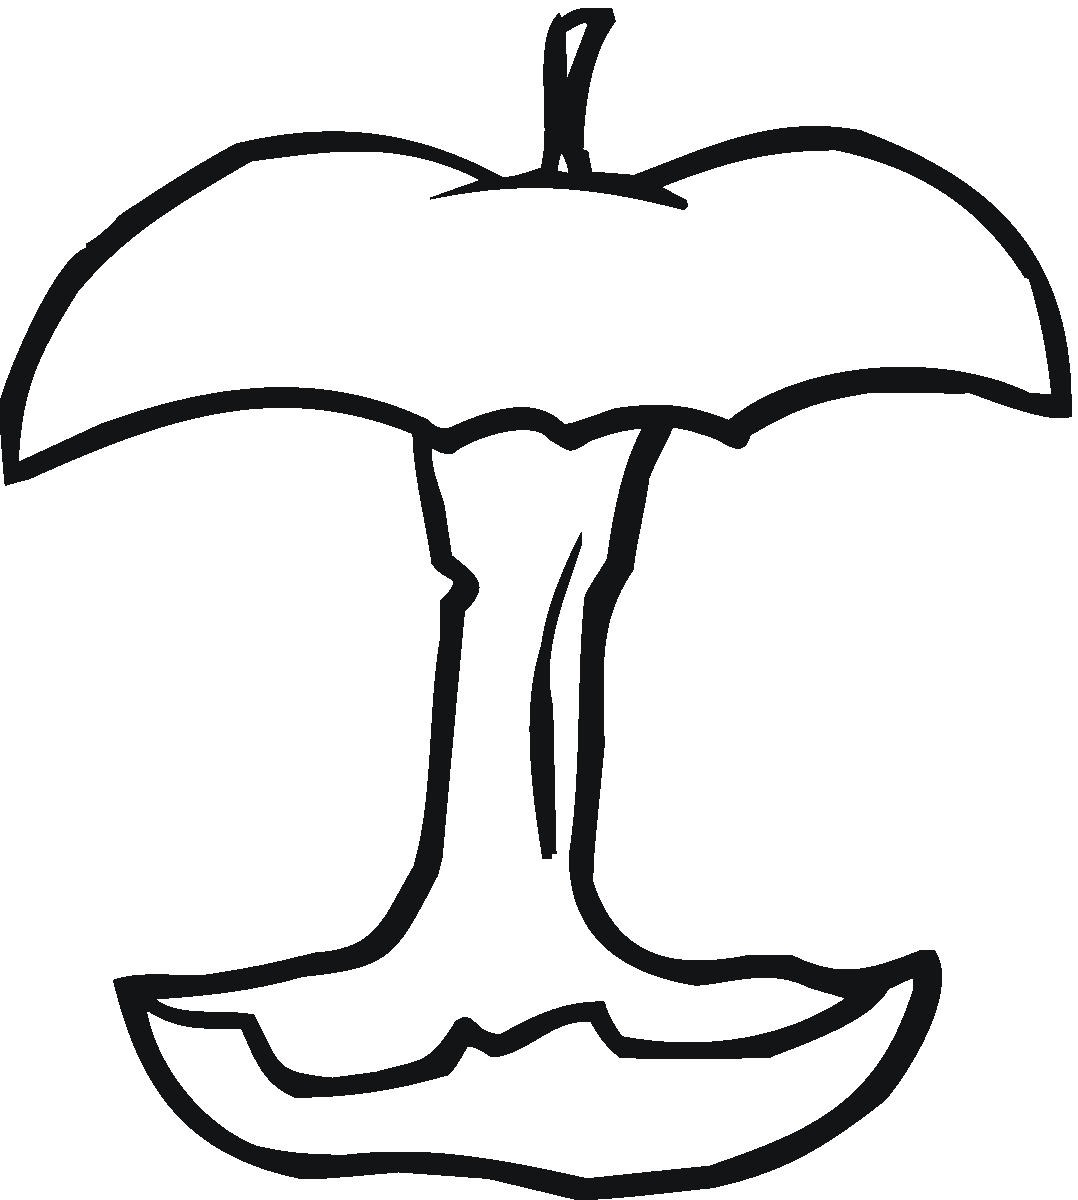 Download Apples Coloring Pages | Learn To Coloring